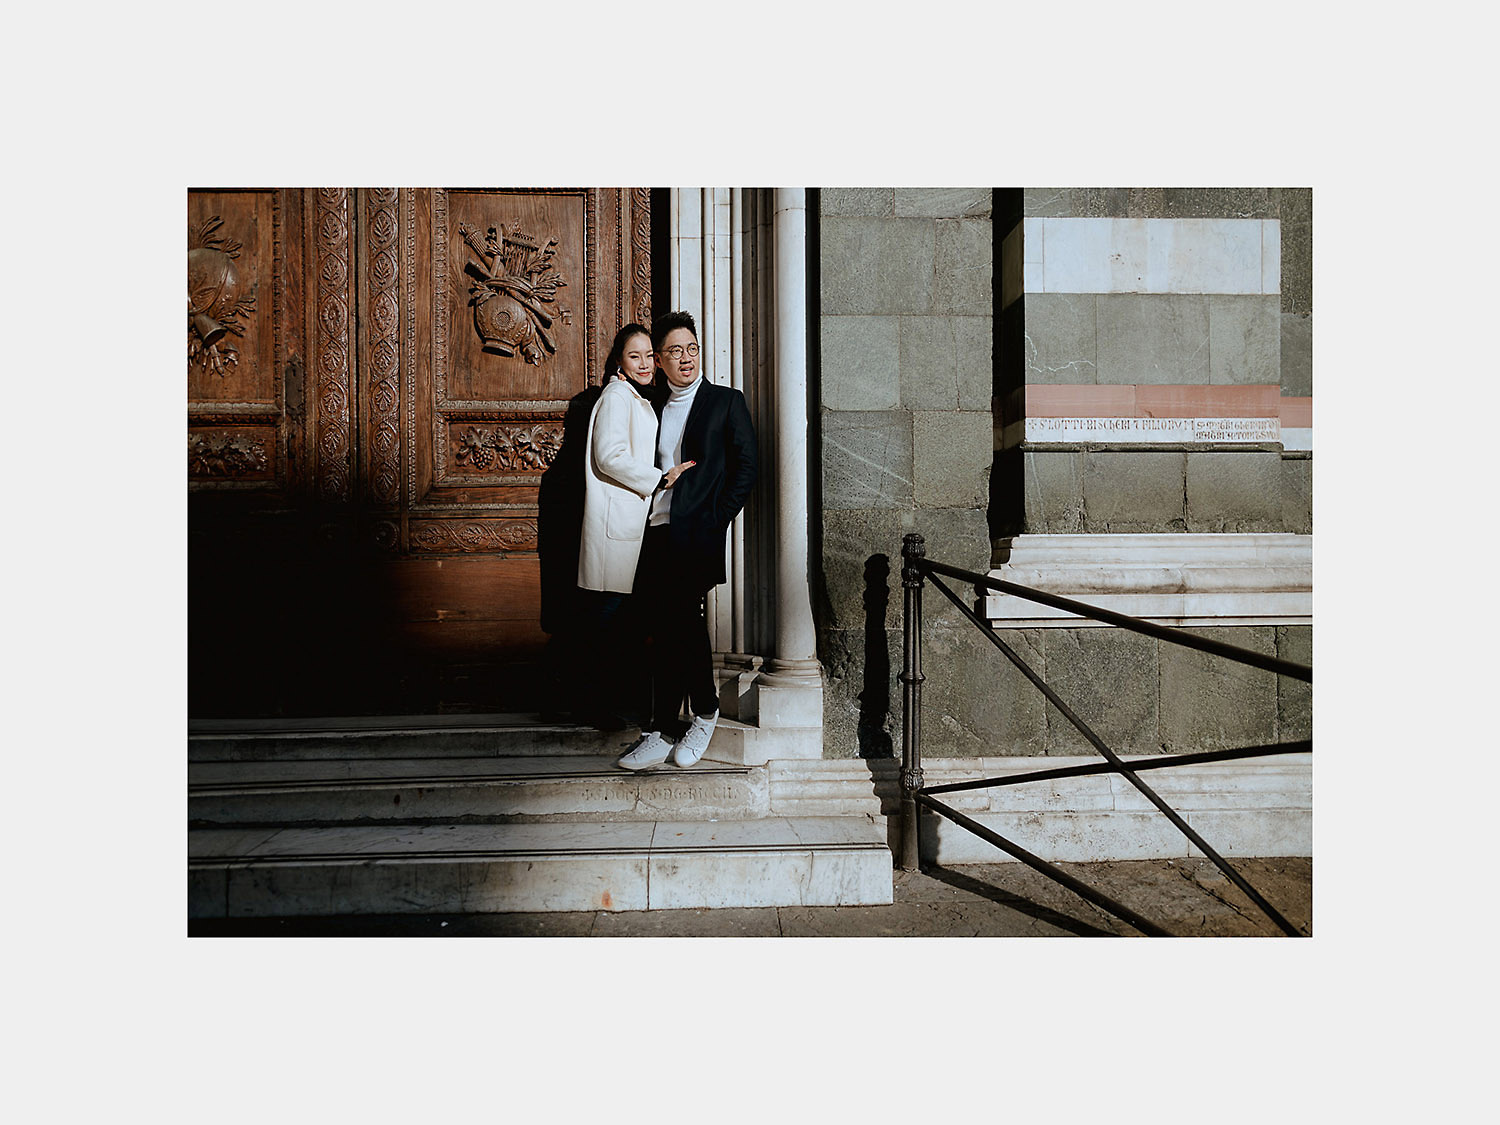 pre wedding photos in florence best couple photographer duomo cattedrale santa maria del fiore